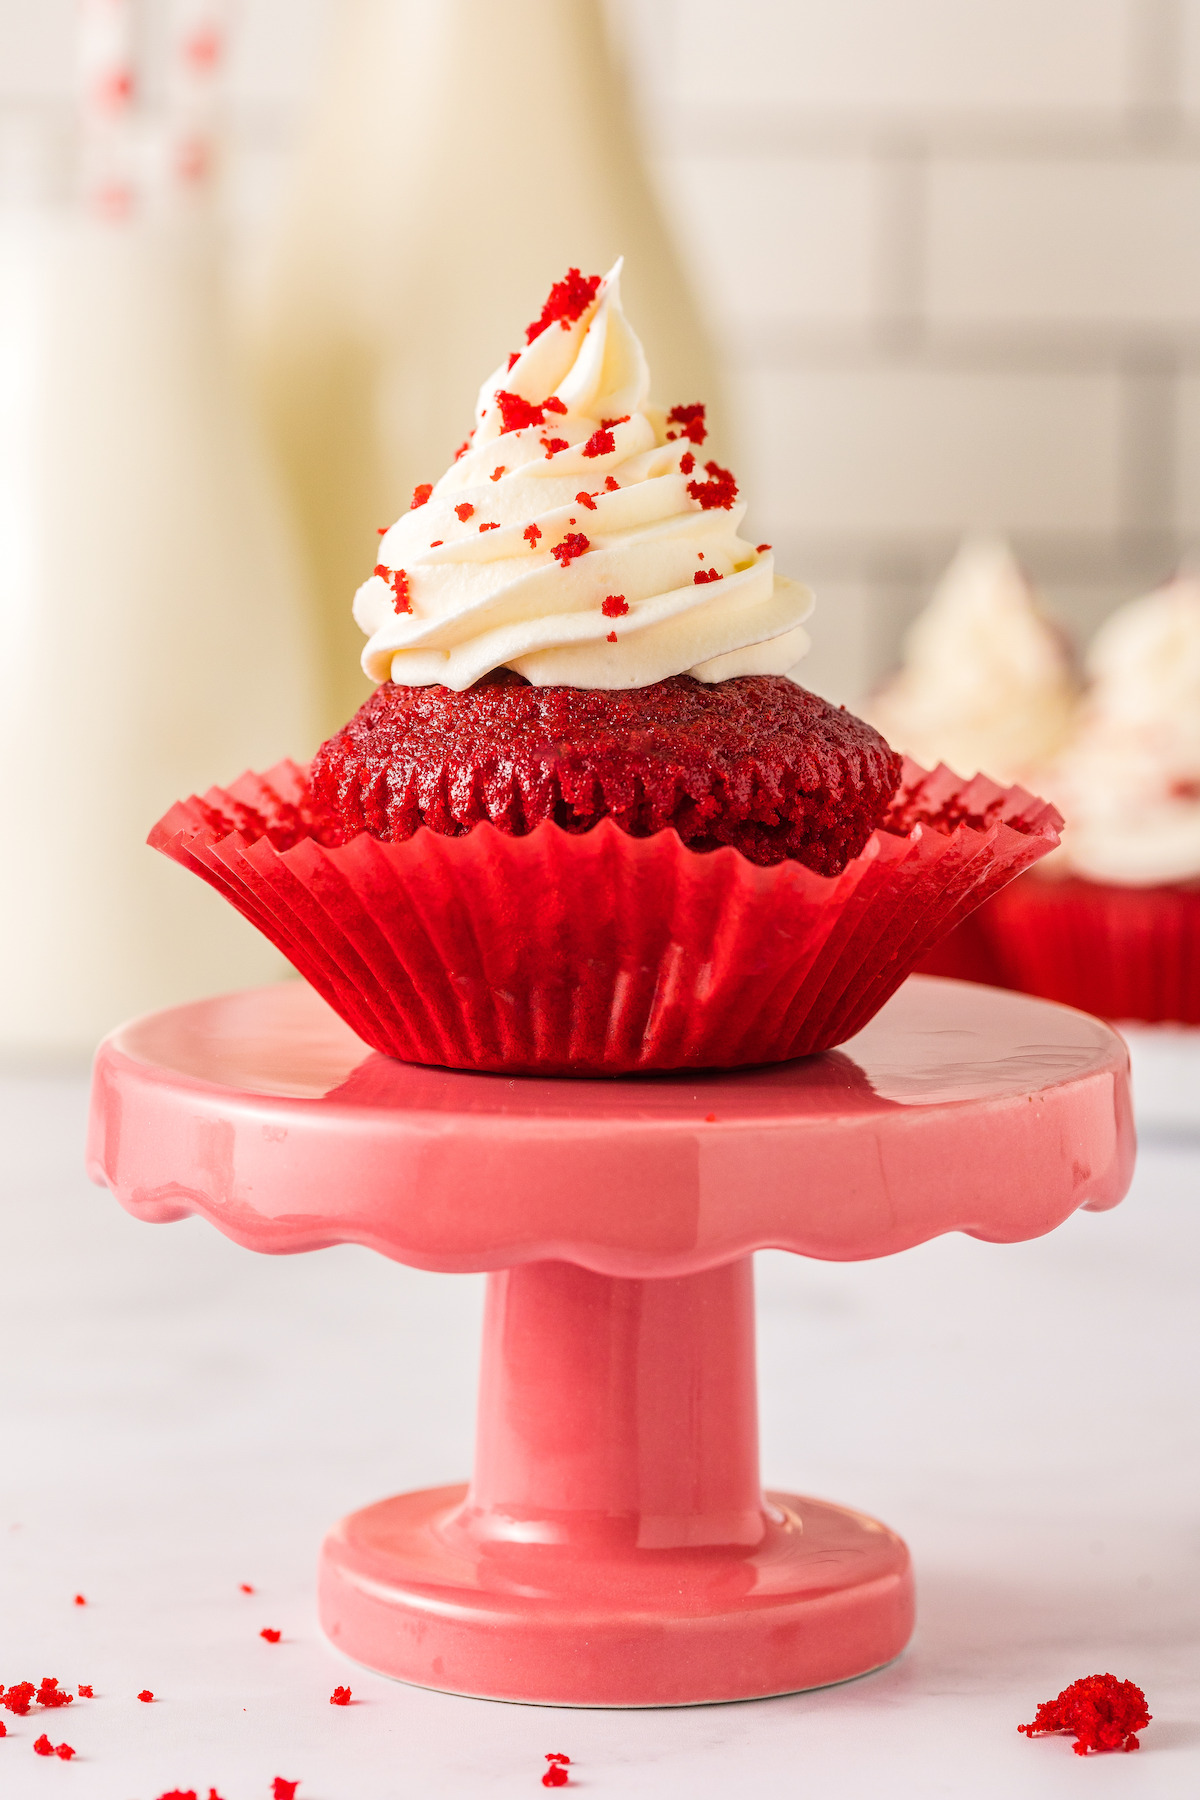 Unwrapped cupcake with cream cheese frosting.